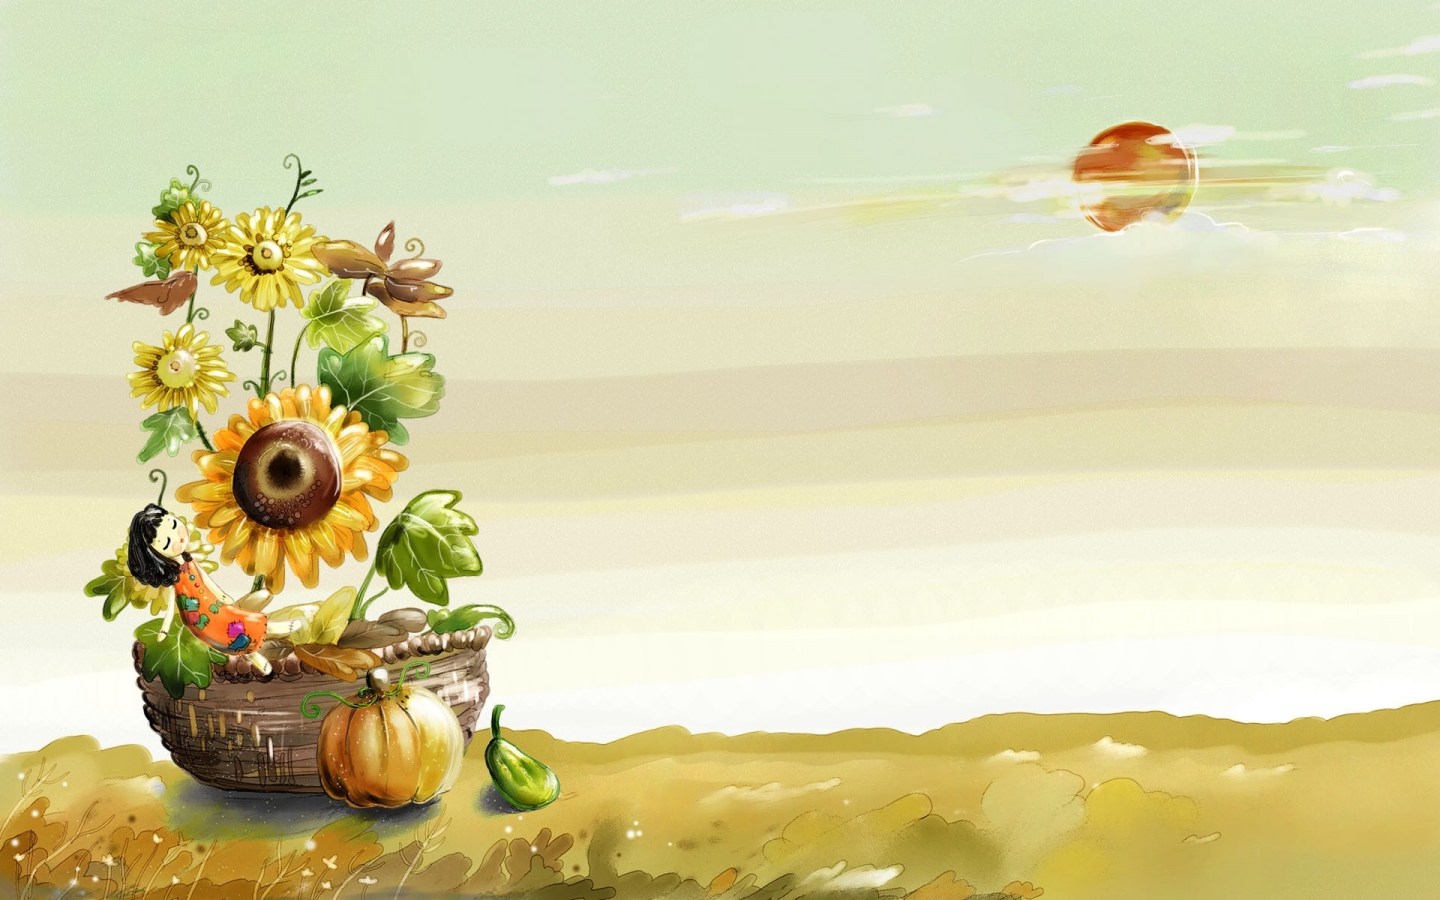 Autumn Illustration for 1440 x 900 widescreen resolution